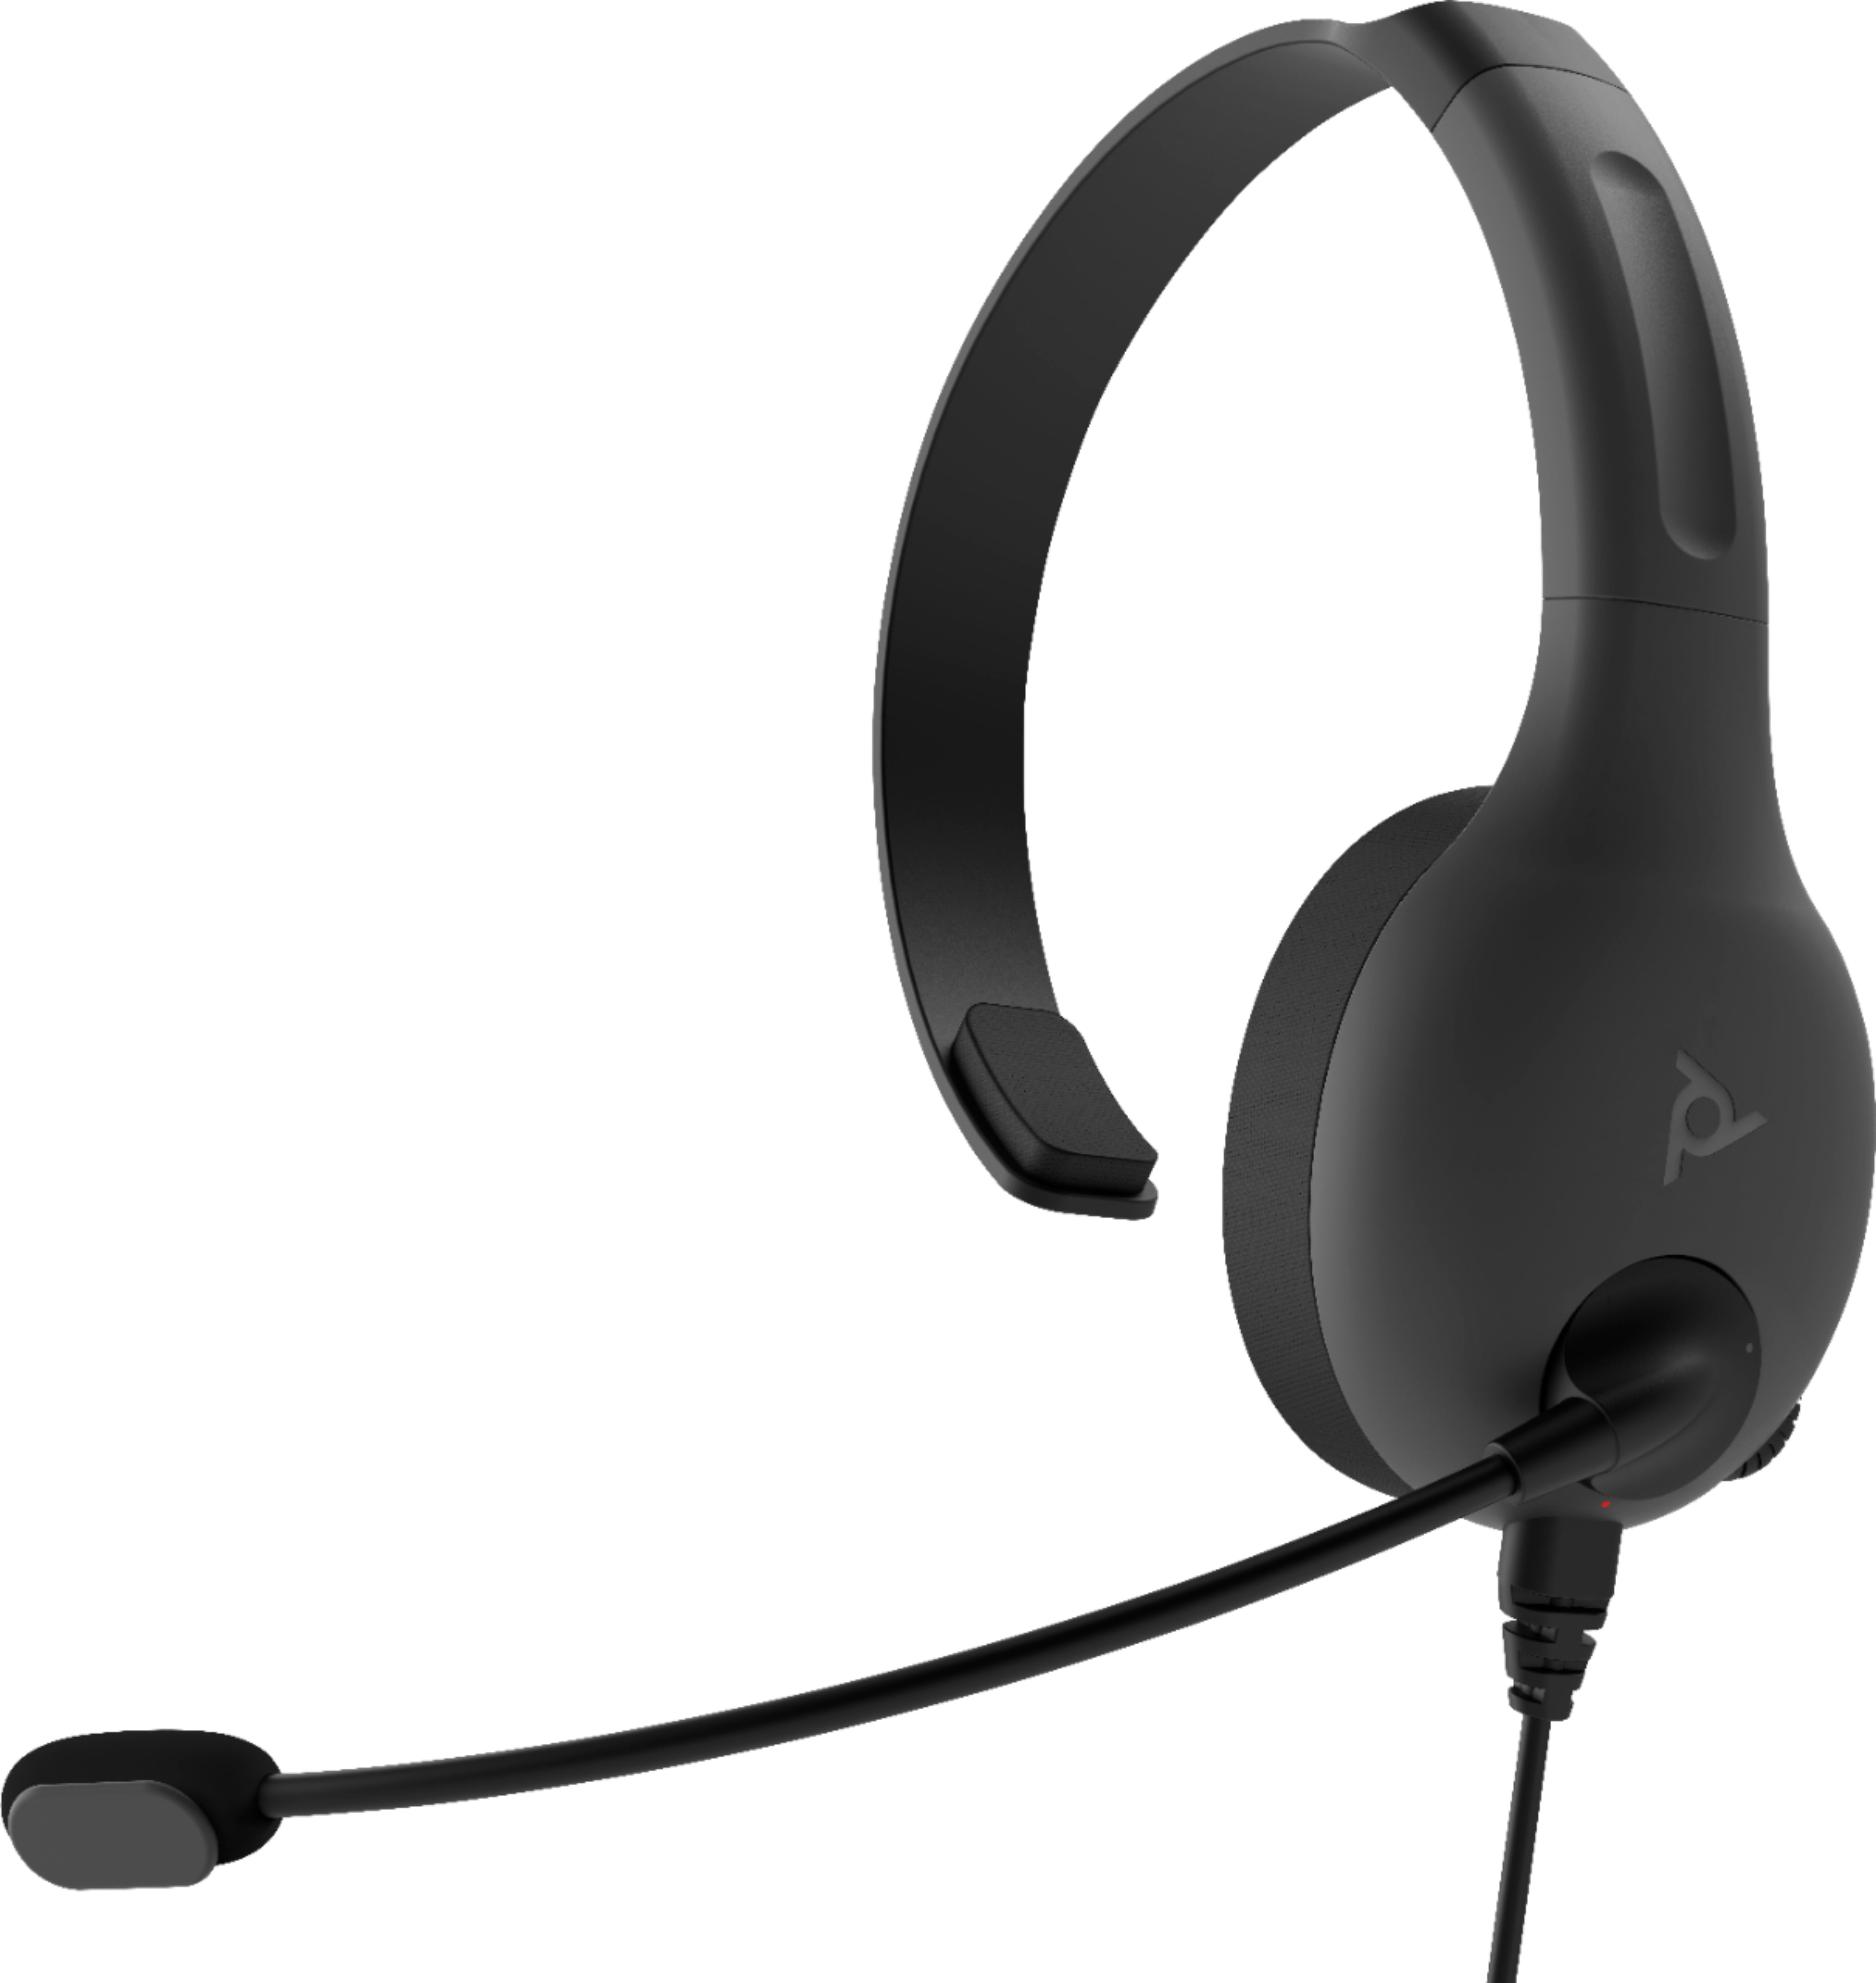 Angle View: PDP - LVL30 Wired Mono Gaming Headset for Xbox One - Gray